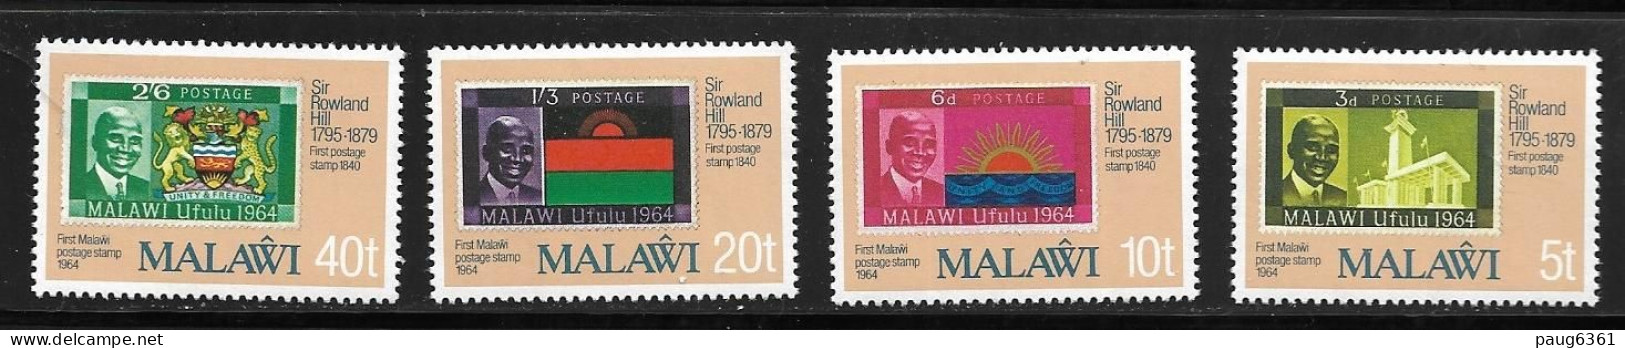 MALAWI 1979 R.HILL-TIMBRES SUR TIMBRES YVERT N°338/41 NEUF MNH** - Rowland Hill